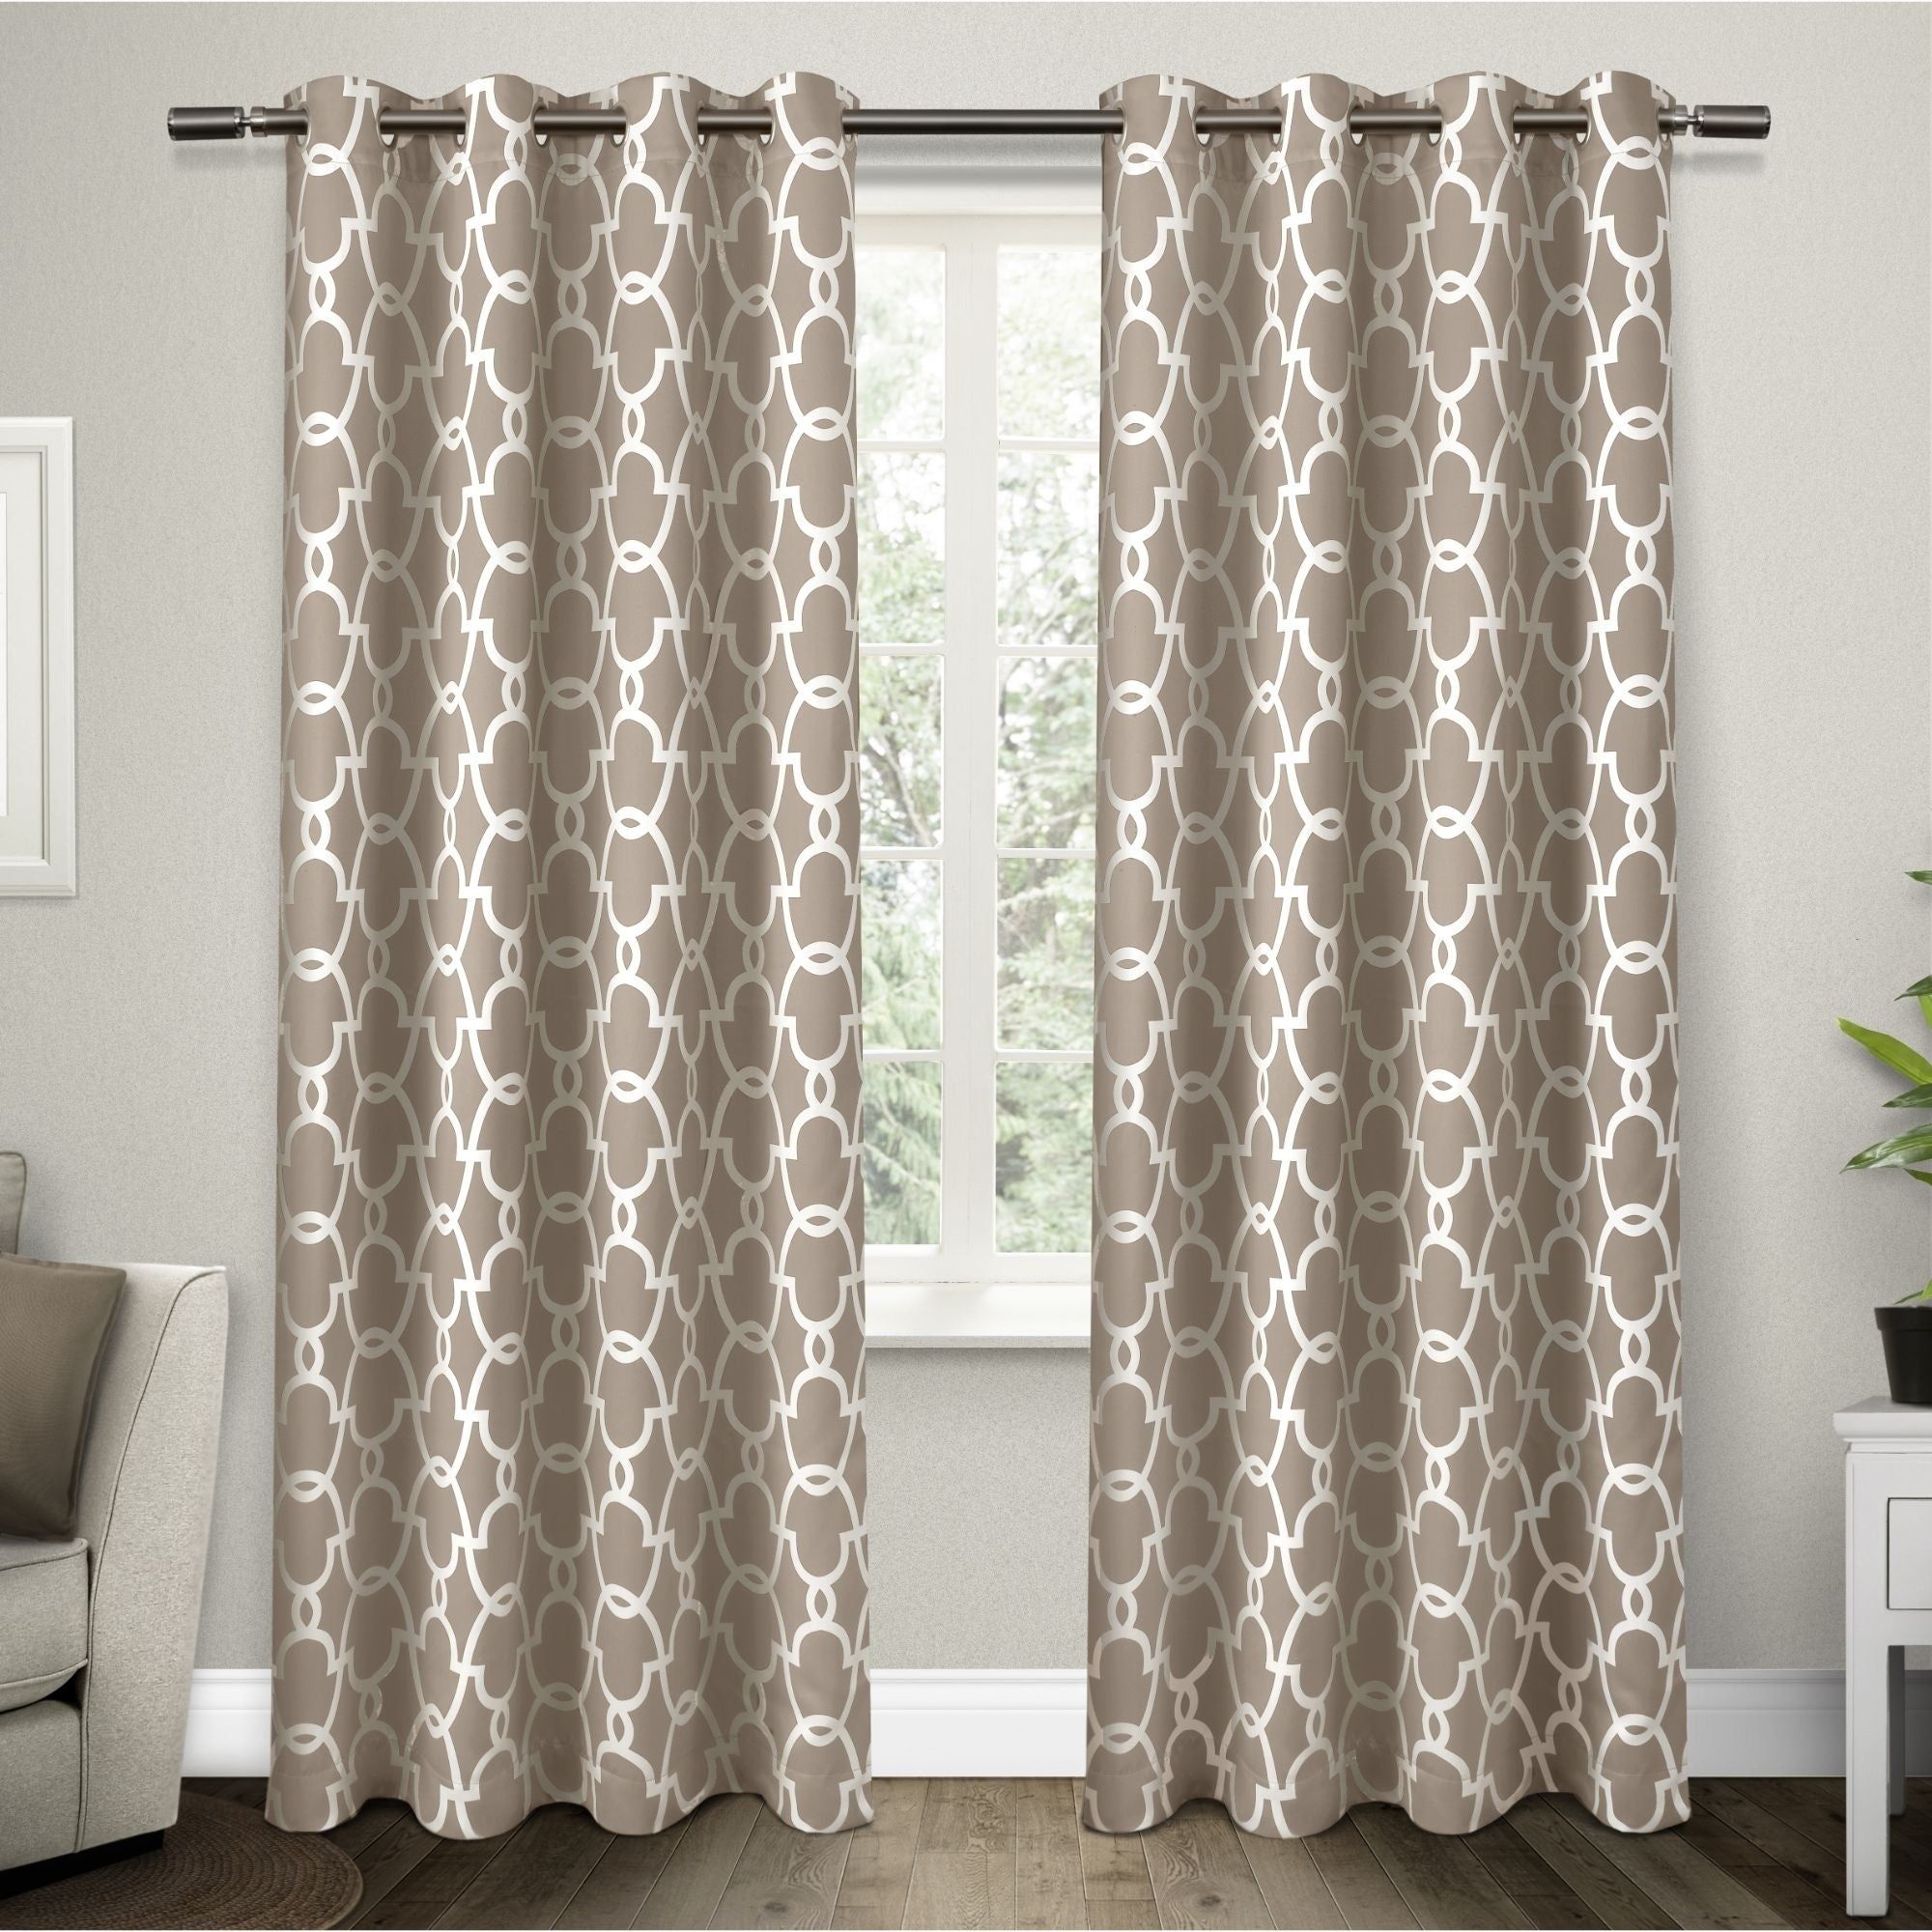 The Curated Nomad Vicksburg Thermal Woven Blackout Grommet Top Curtain  Panel Pair Inside The Curated Nomad Duane Jacquard Grommet Top Curtain Panel Pairs (View 28 of 30)